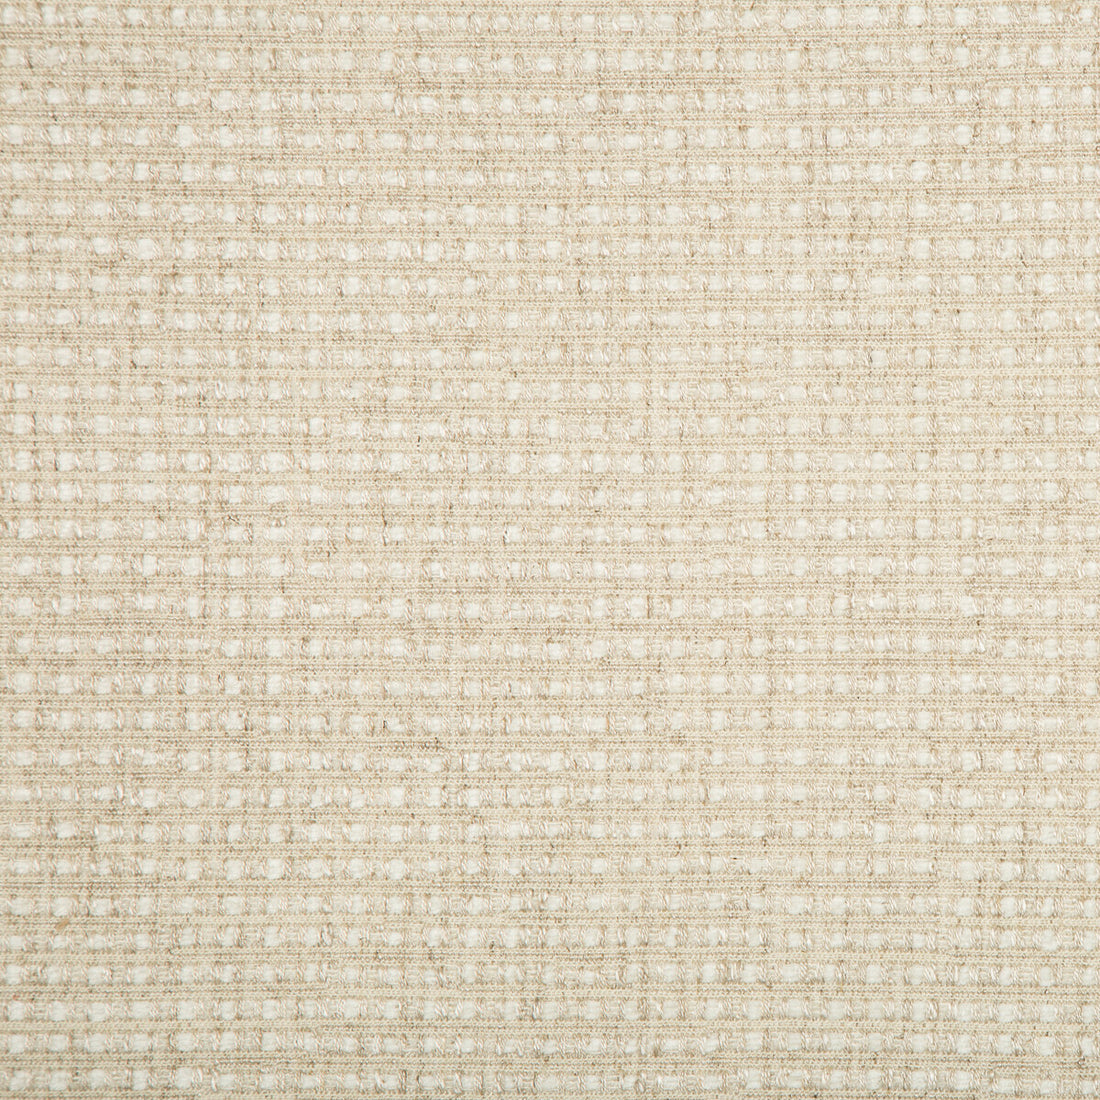 Stissing fabric in natural color - pattern 2019156.116.0 - by Lee Jofa in the Carrier And Company collection